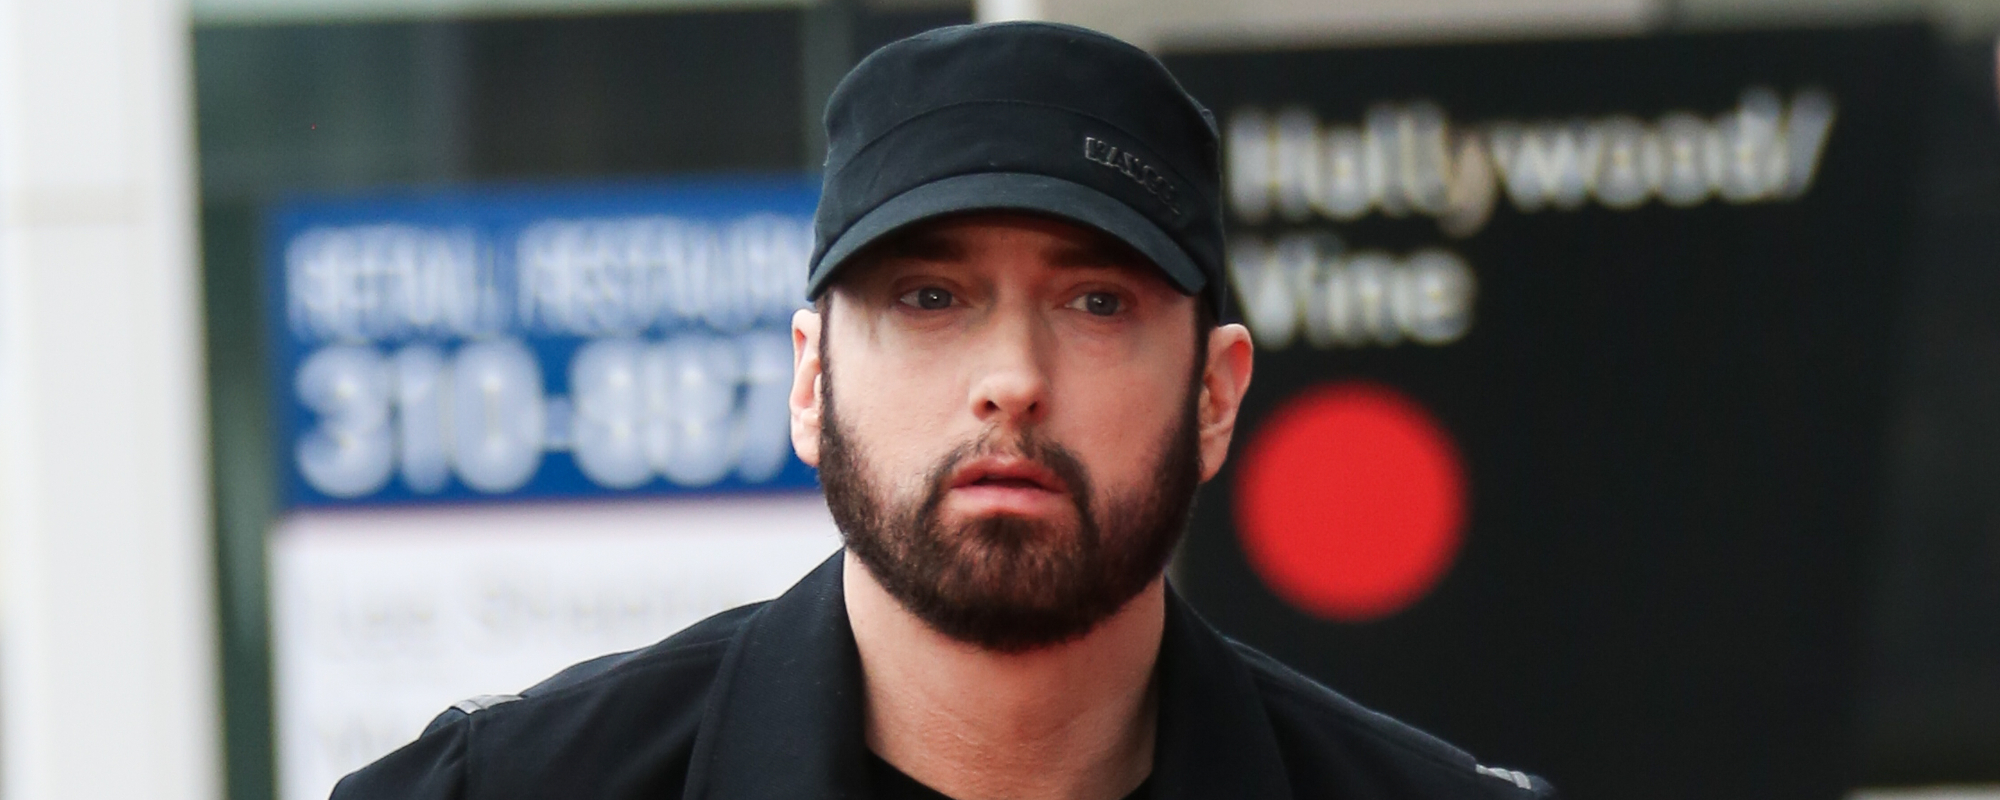 Eminem Makes an Offer the Detroit Lions Surely Will Refuse: “I’m Around for Sunday”